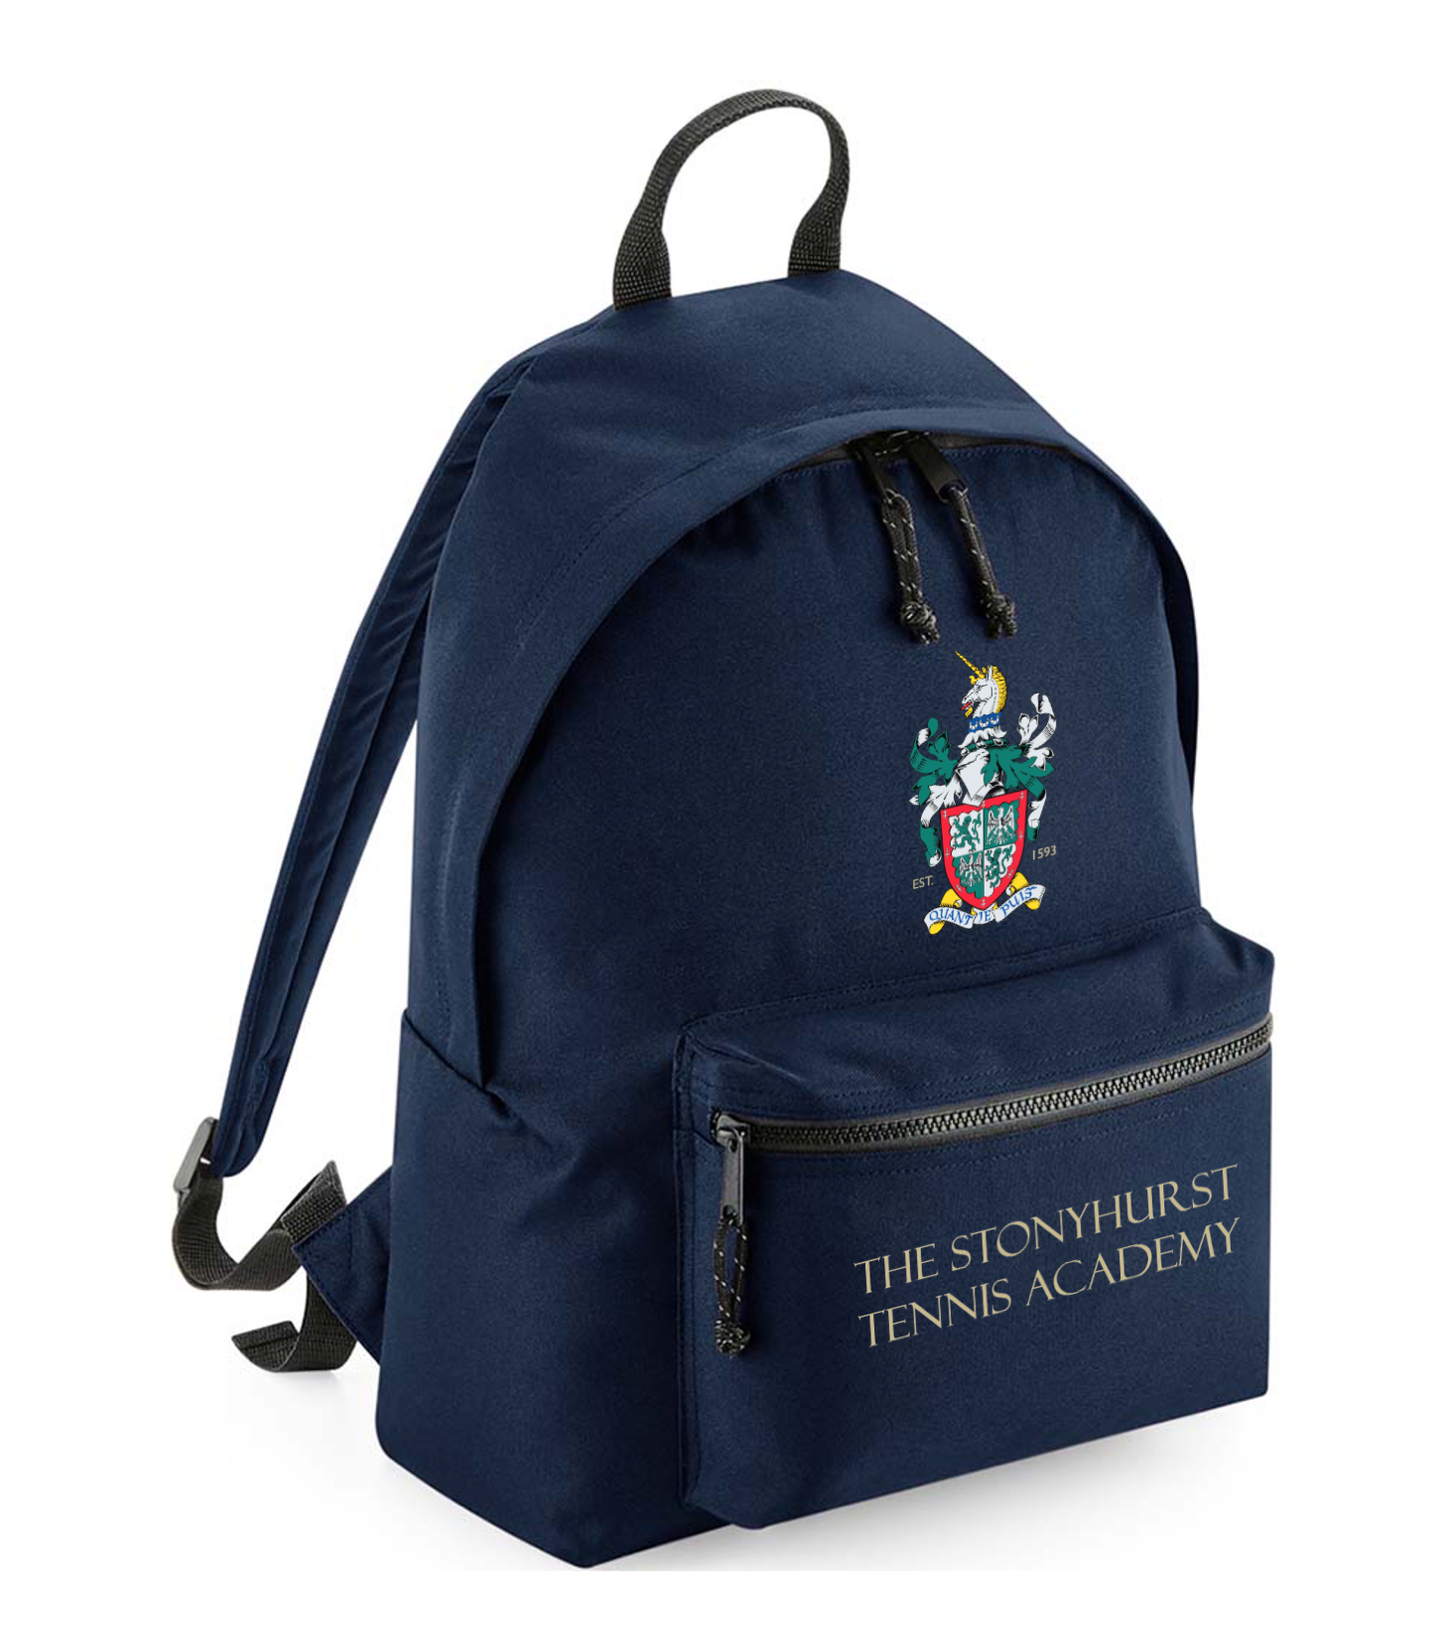 Tennis Academy Navy Recycled Backpack